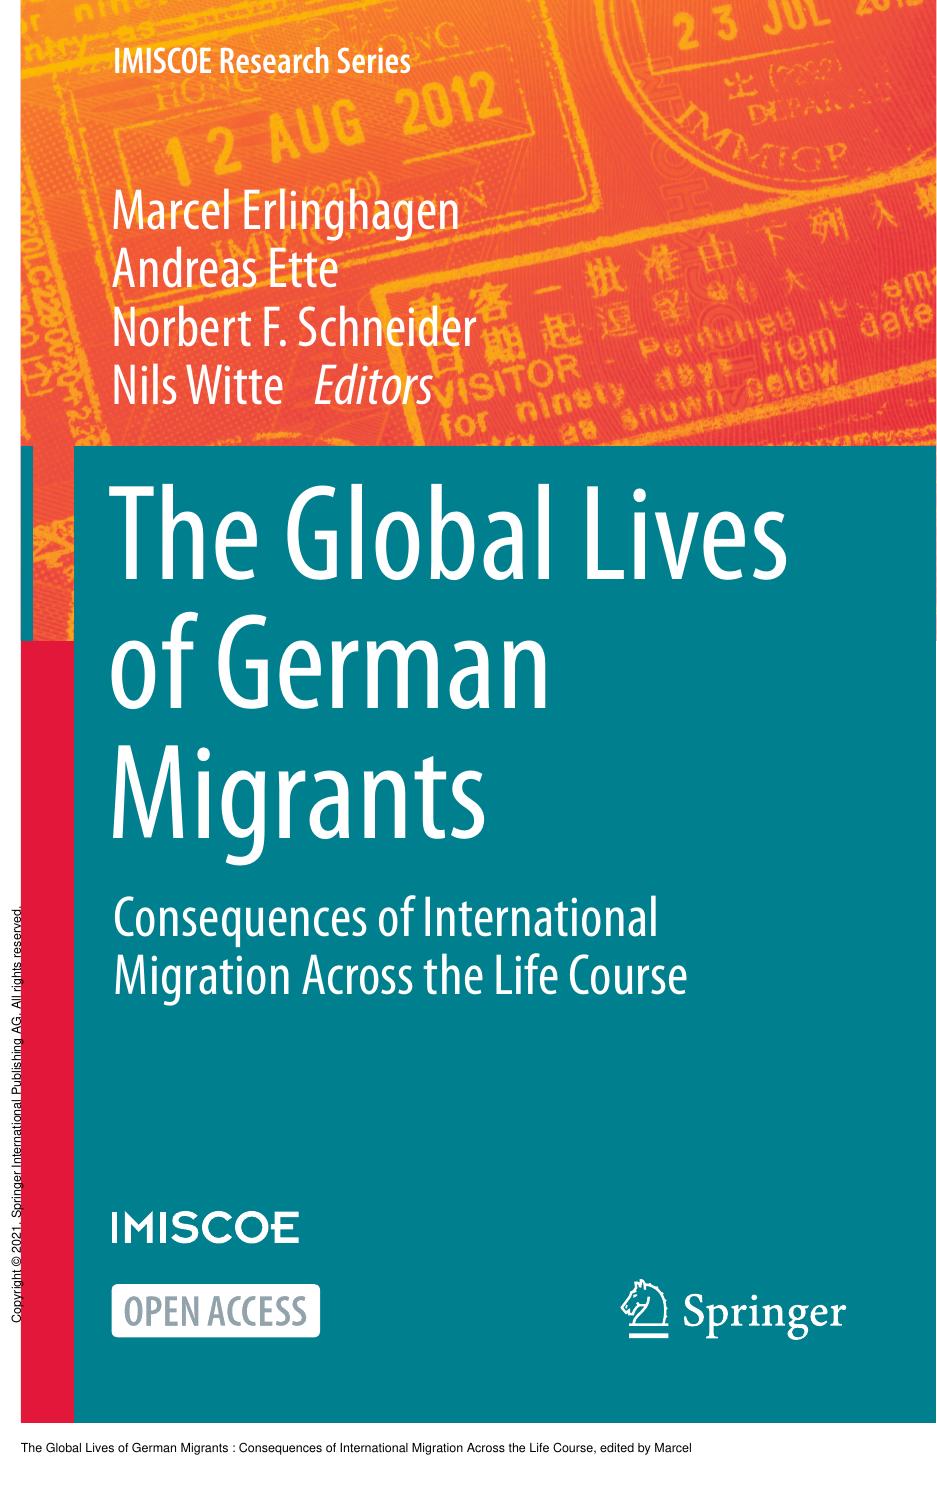 The Global Lives of German Migrants : Consequences of International Migration Across the Life Course by Marcel Erlinghagen; Andreas Ette; Norbert F. Schneider; Nils Witte